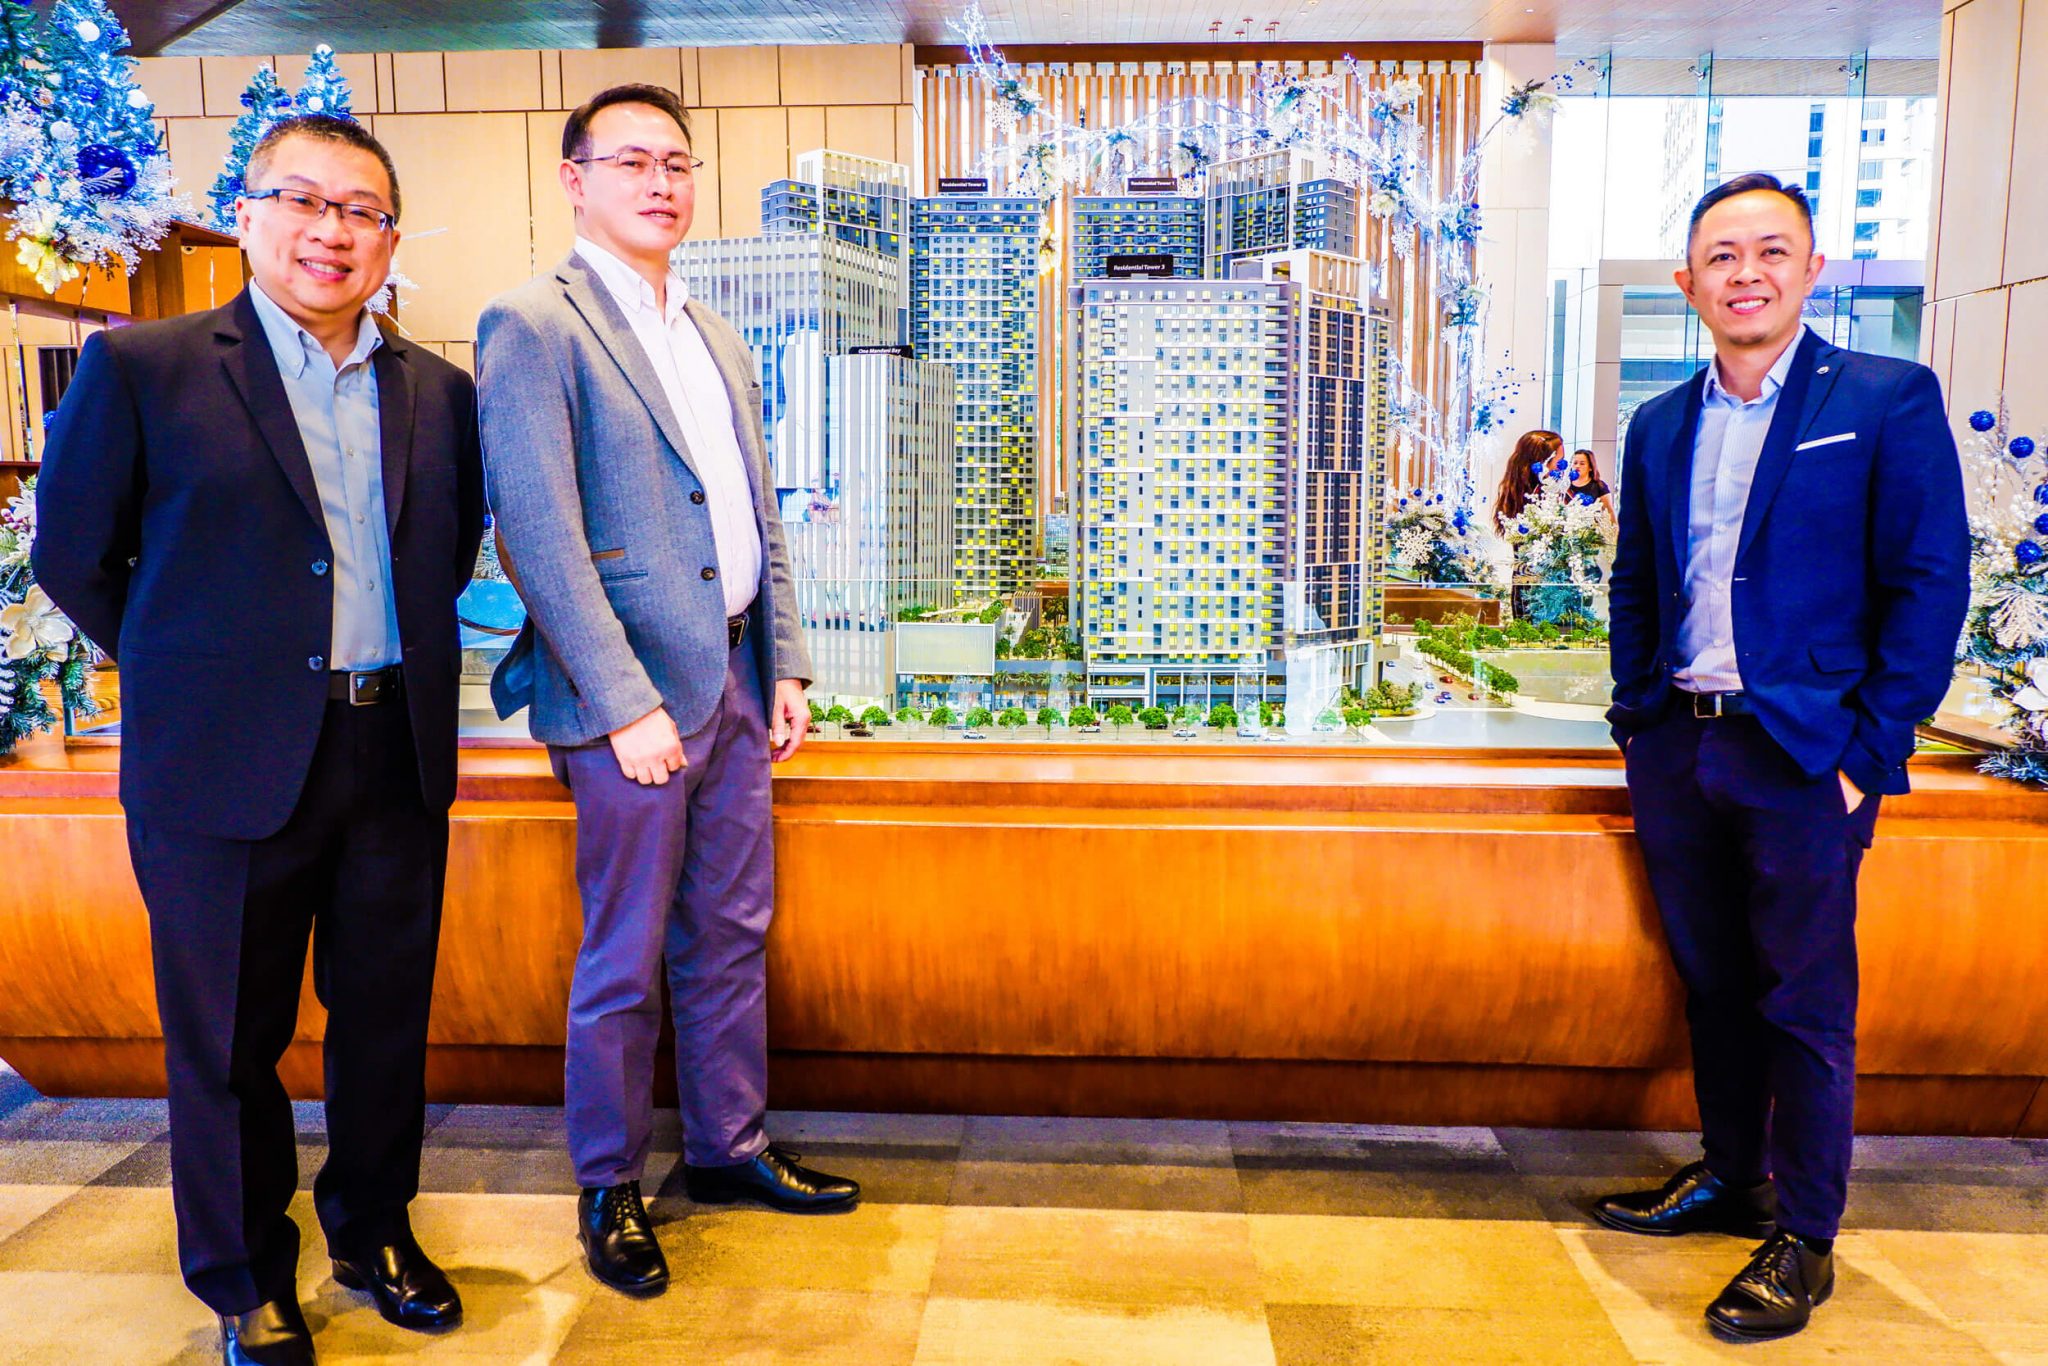 MANDANI BAY QUAY. Project Advisor Jeffrey Lun, Project Director Gilbert Ang, Sales Head Audrey Villa at a scale model of the Mandani Bay development during the announcement of their third and last residential tower in the second phase of the waterfront development.